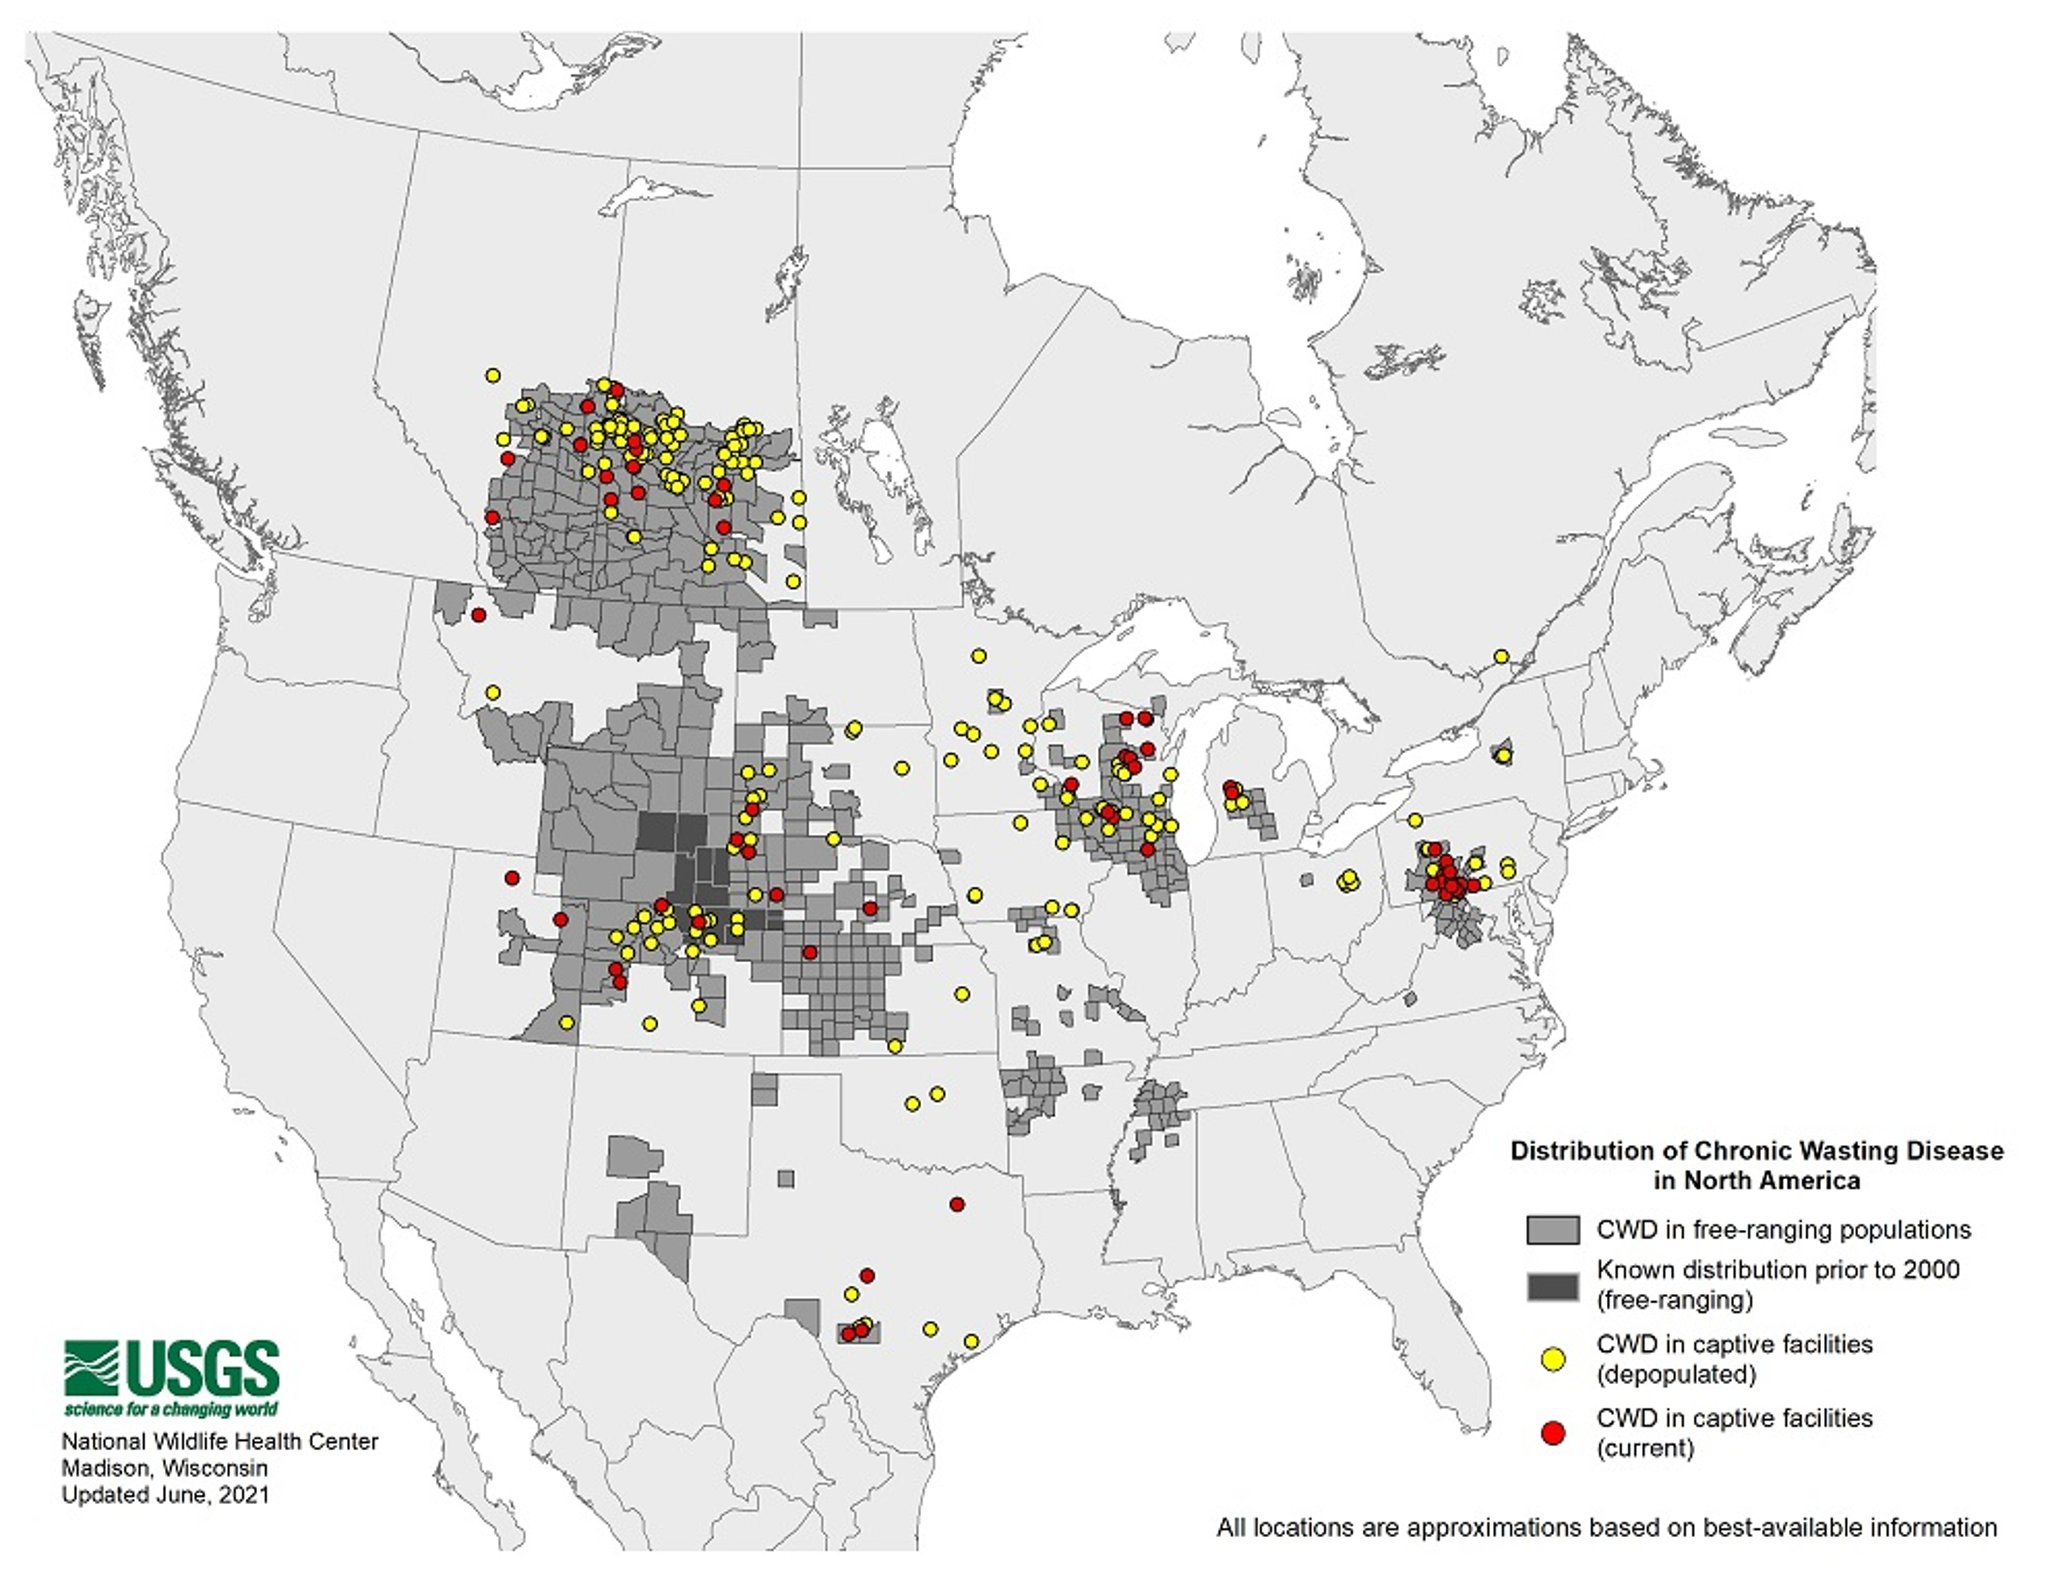 Distribution of Chronic Wasting Disease in North America